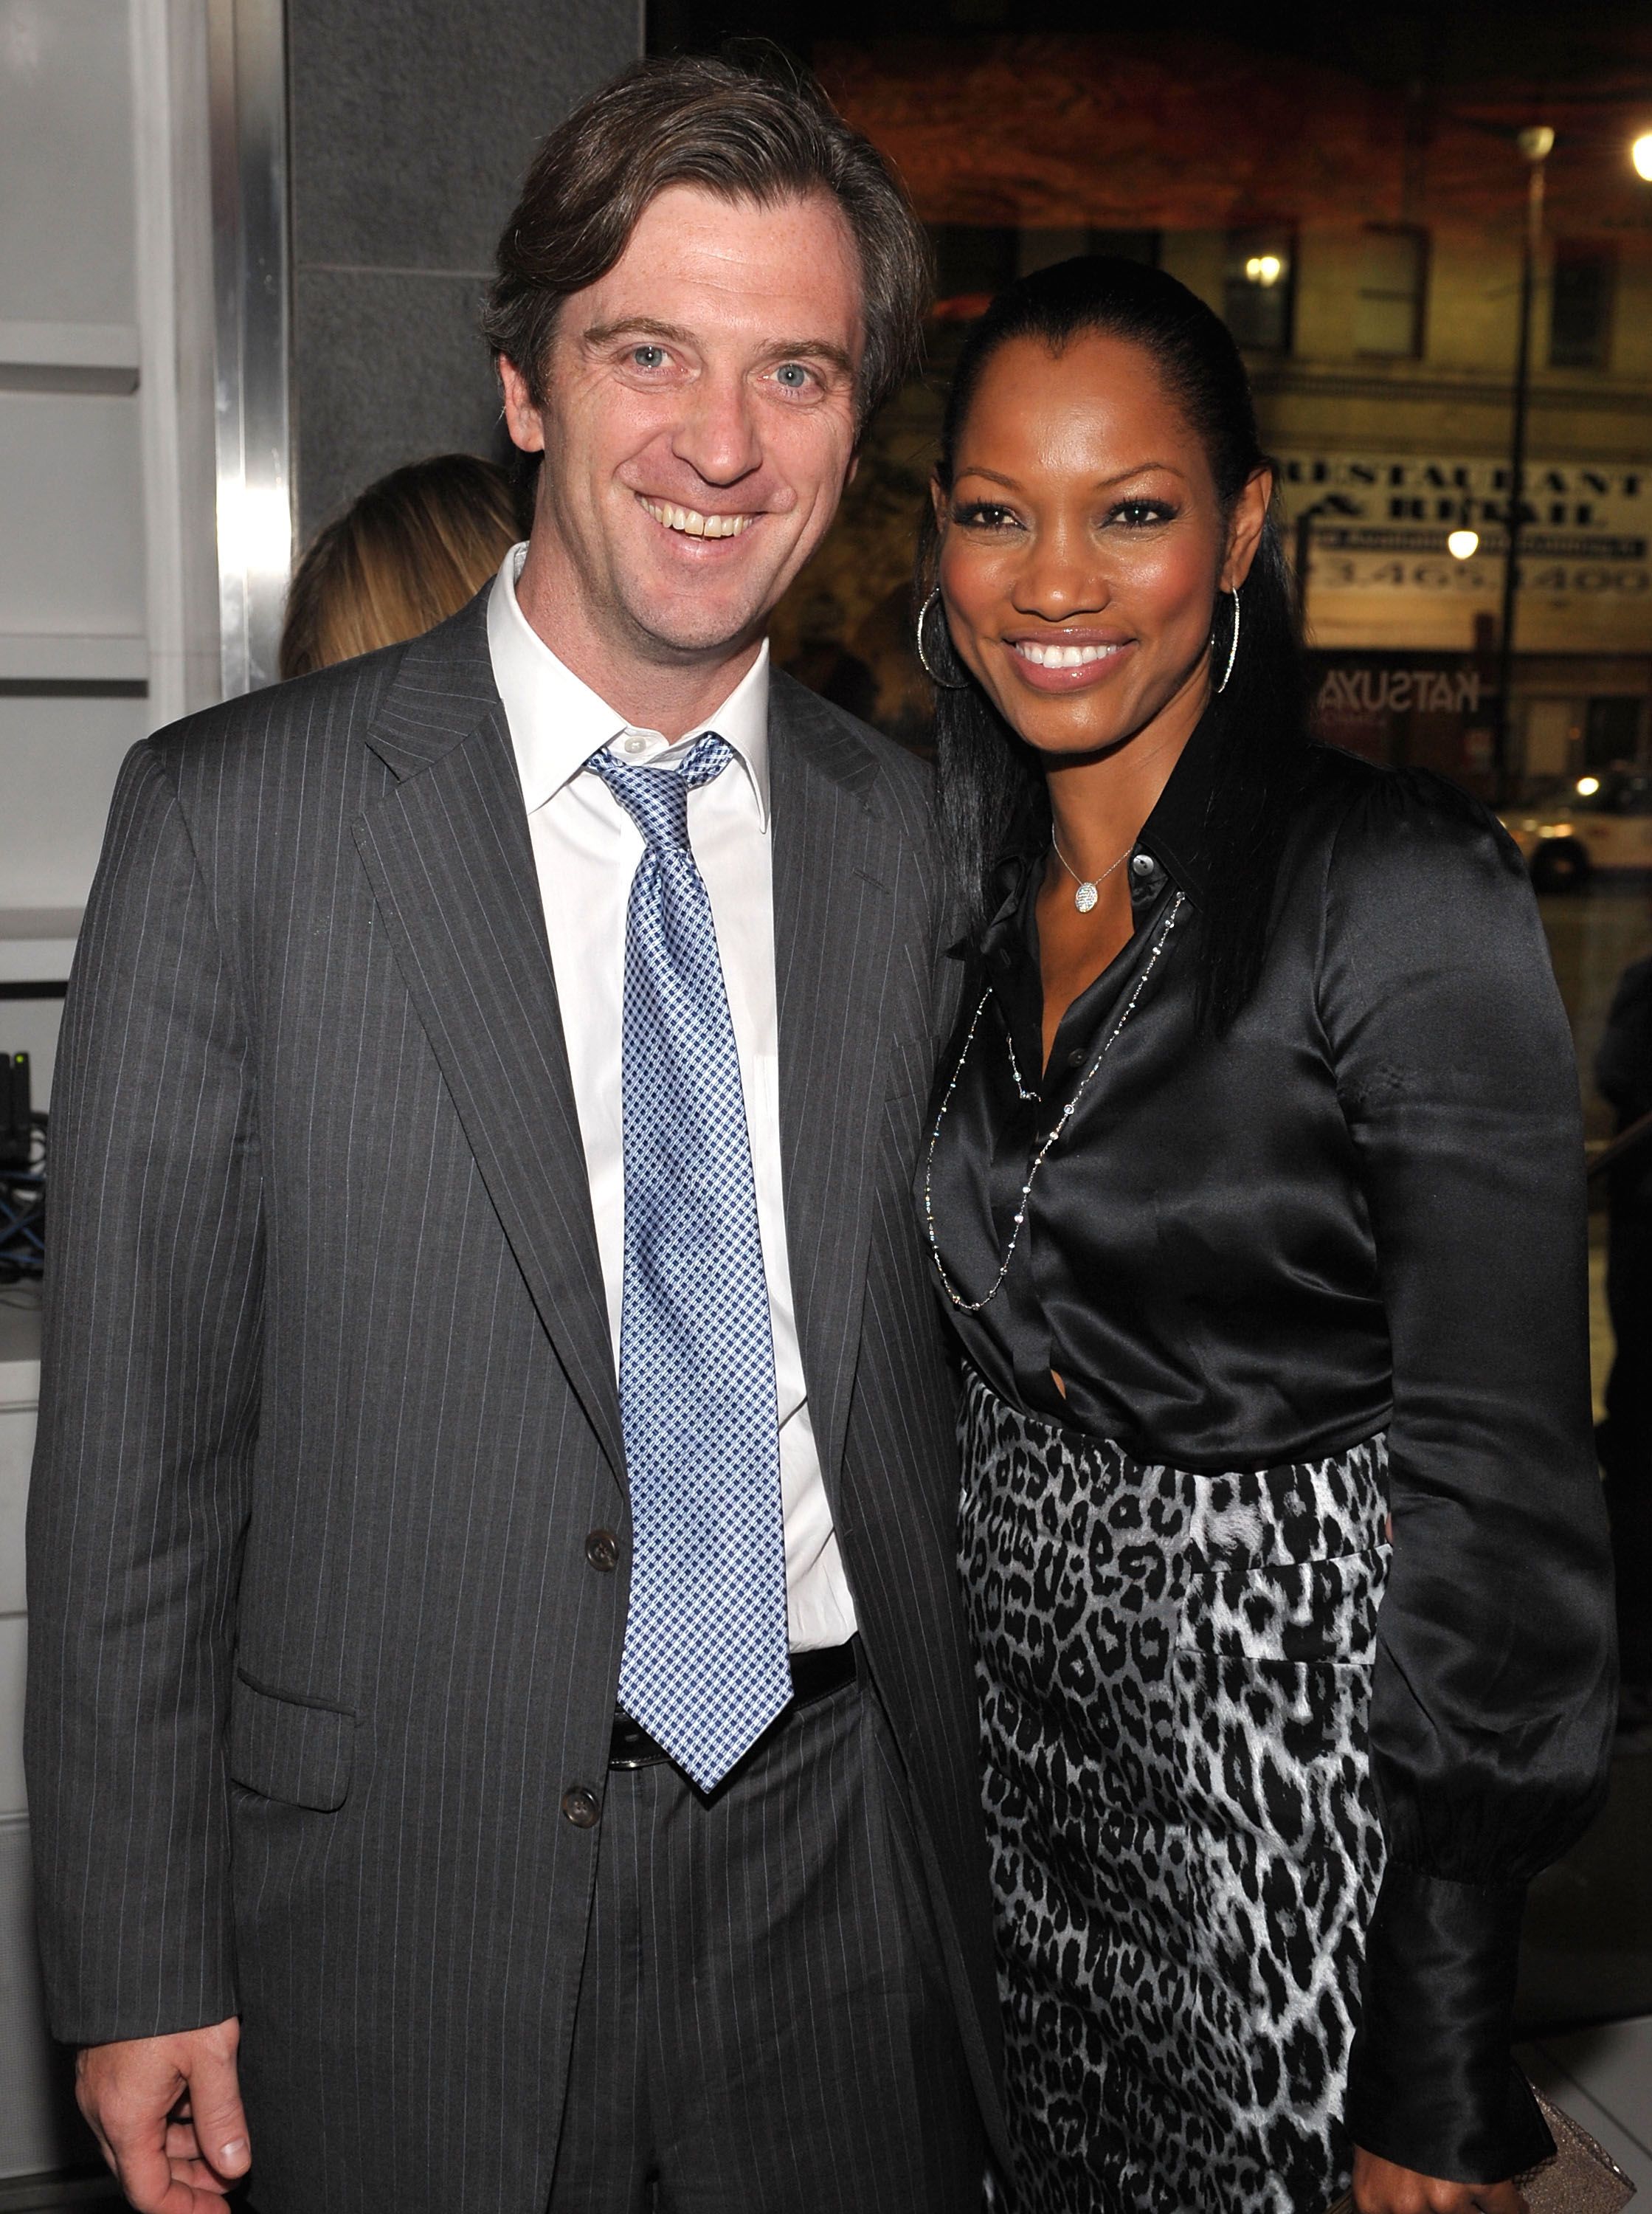 Garcelle Beauvais and Mike Nilon at the after party for the Los Angeles premiere of "Spread" in 2009 in Hollywood | Source: Getty Images